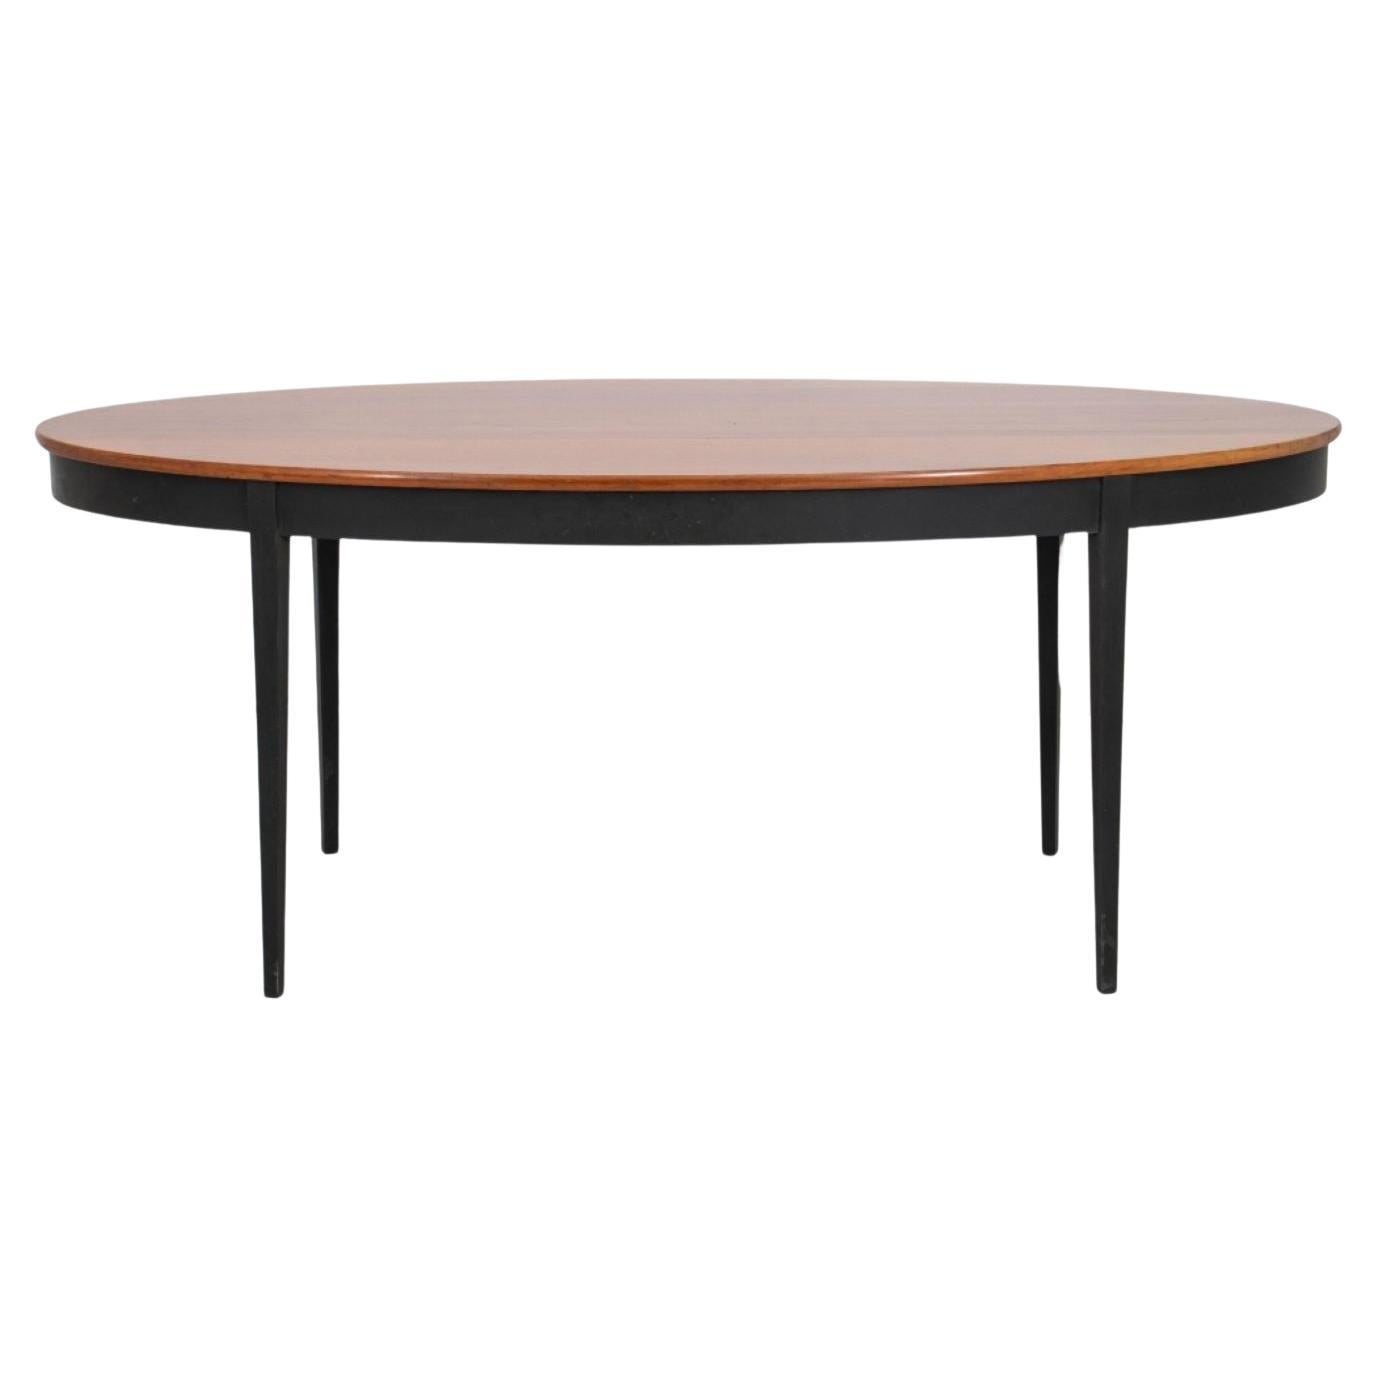 Rustic Painted Wood Ovoid Dining Table For Sale